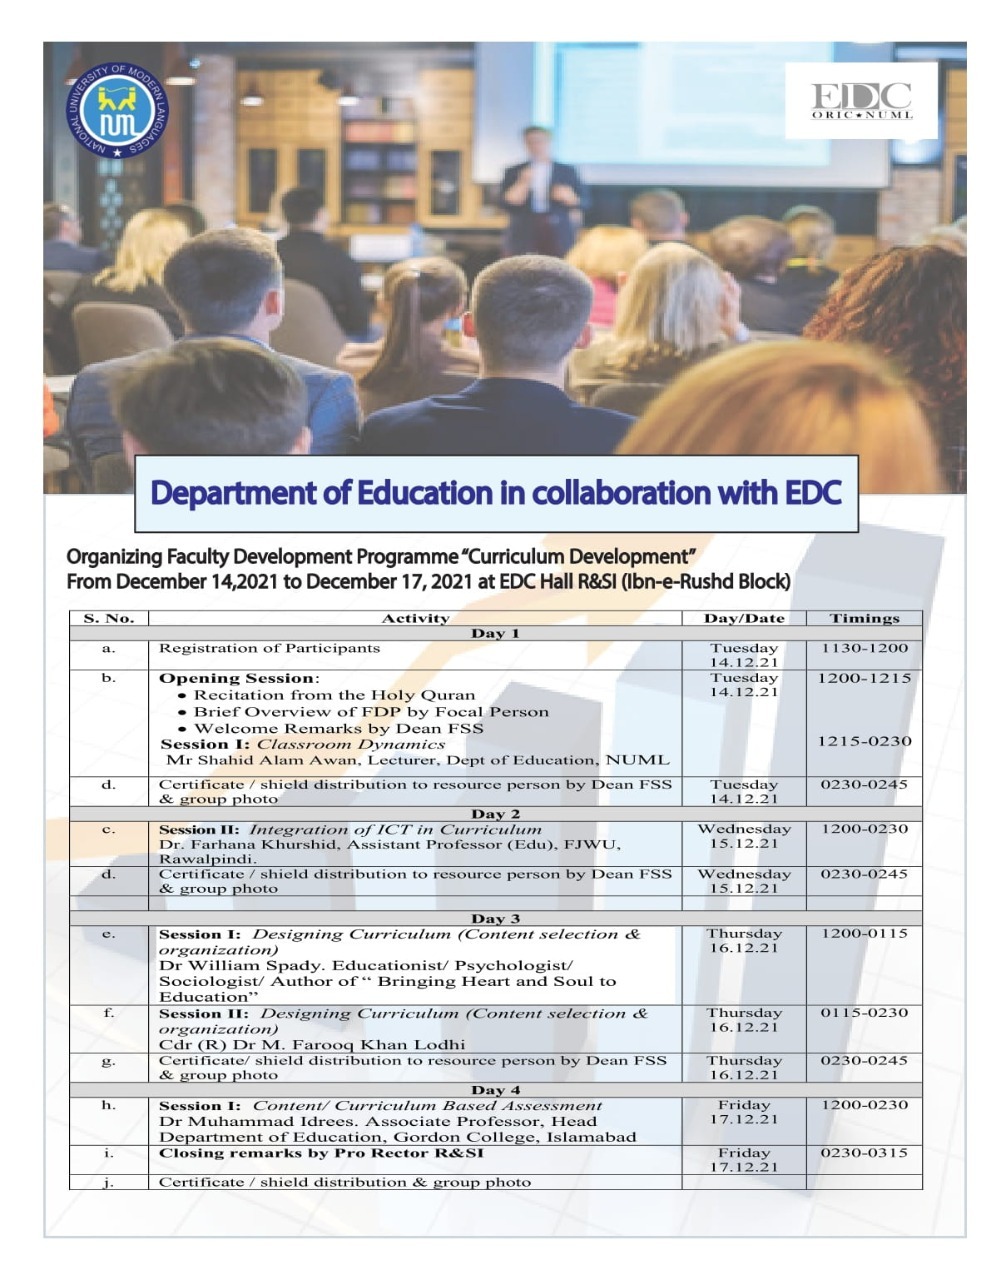 Department of Education in collaboration with EDC is organizing Faculty Development Programme "Curriculum Development"